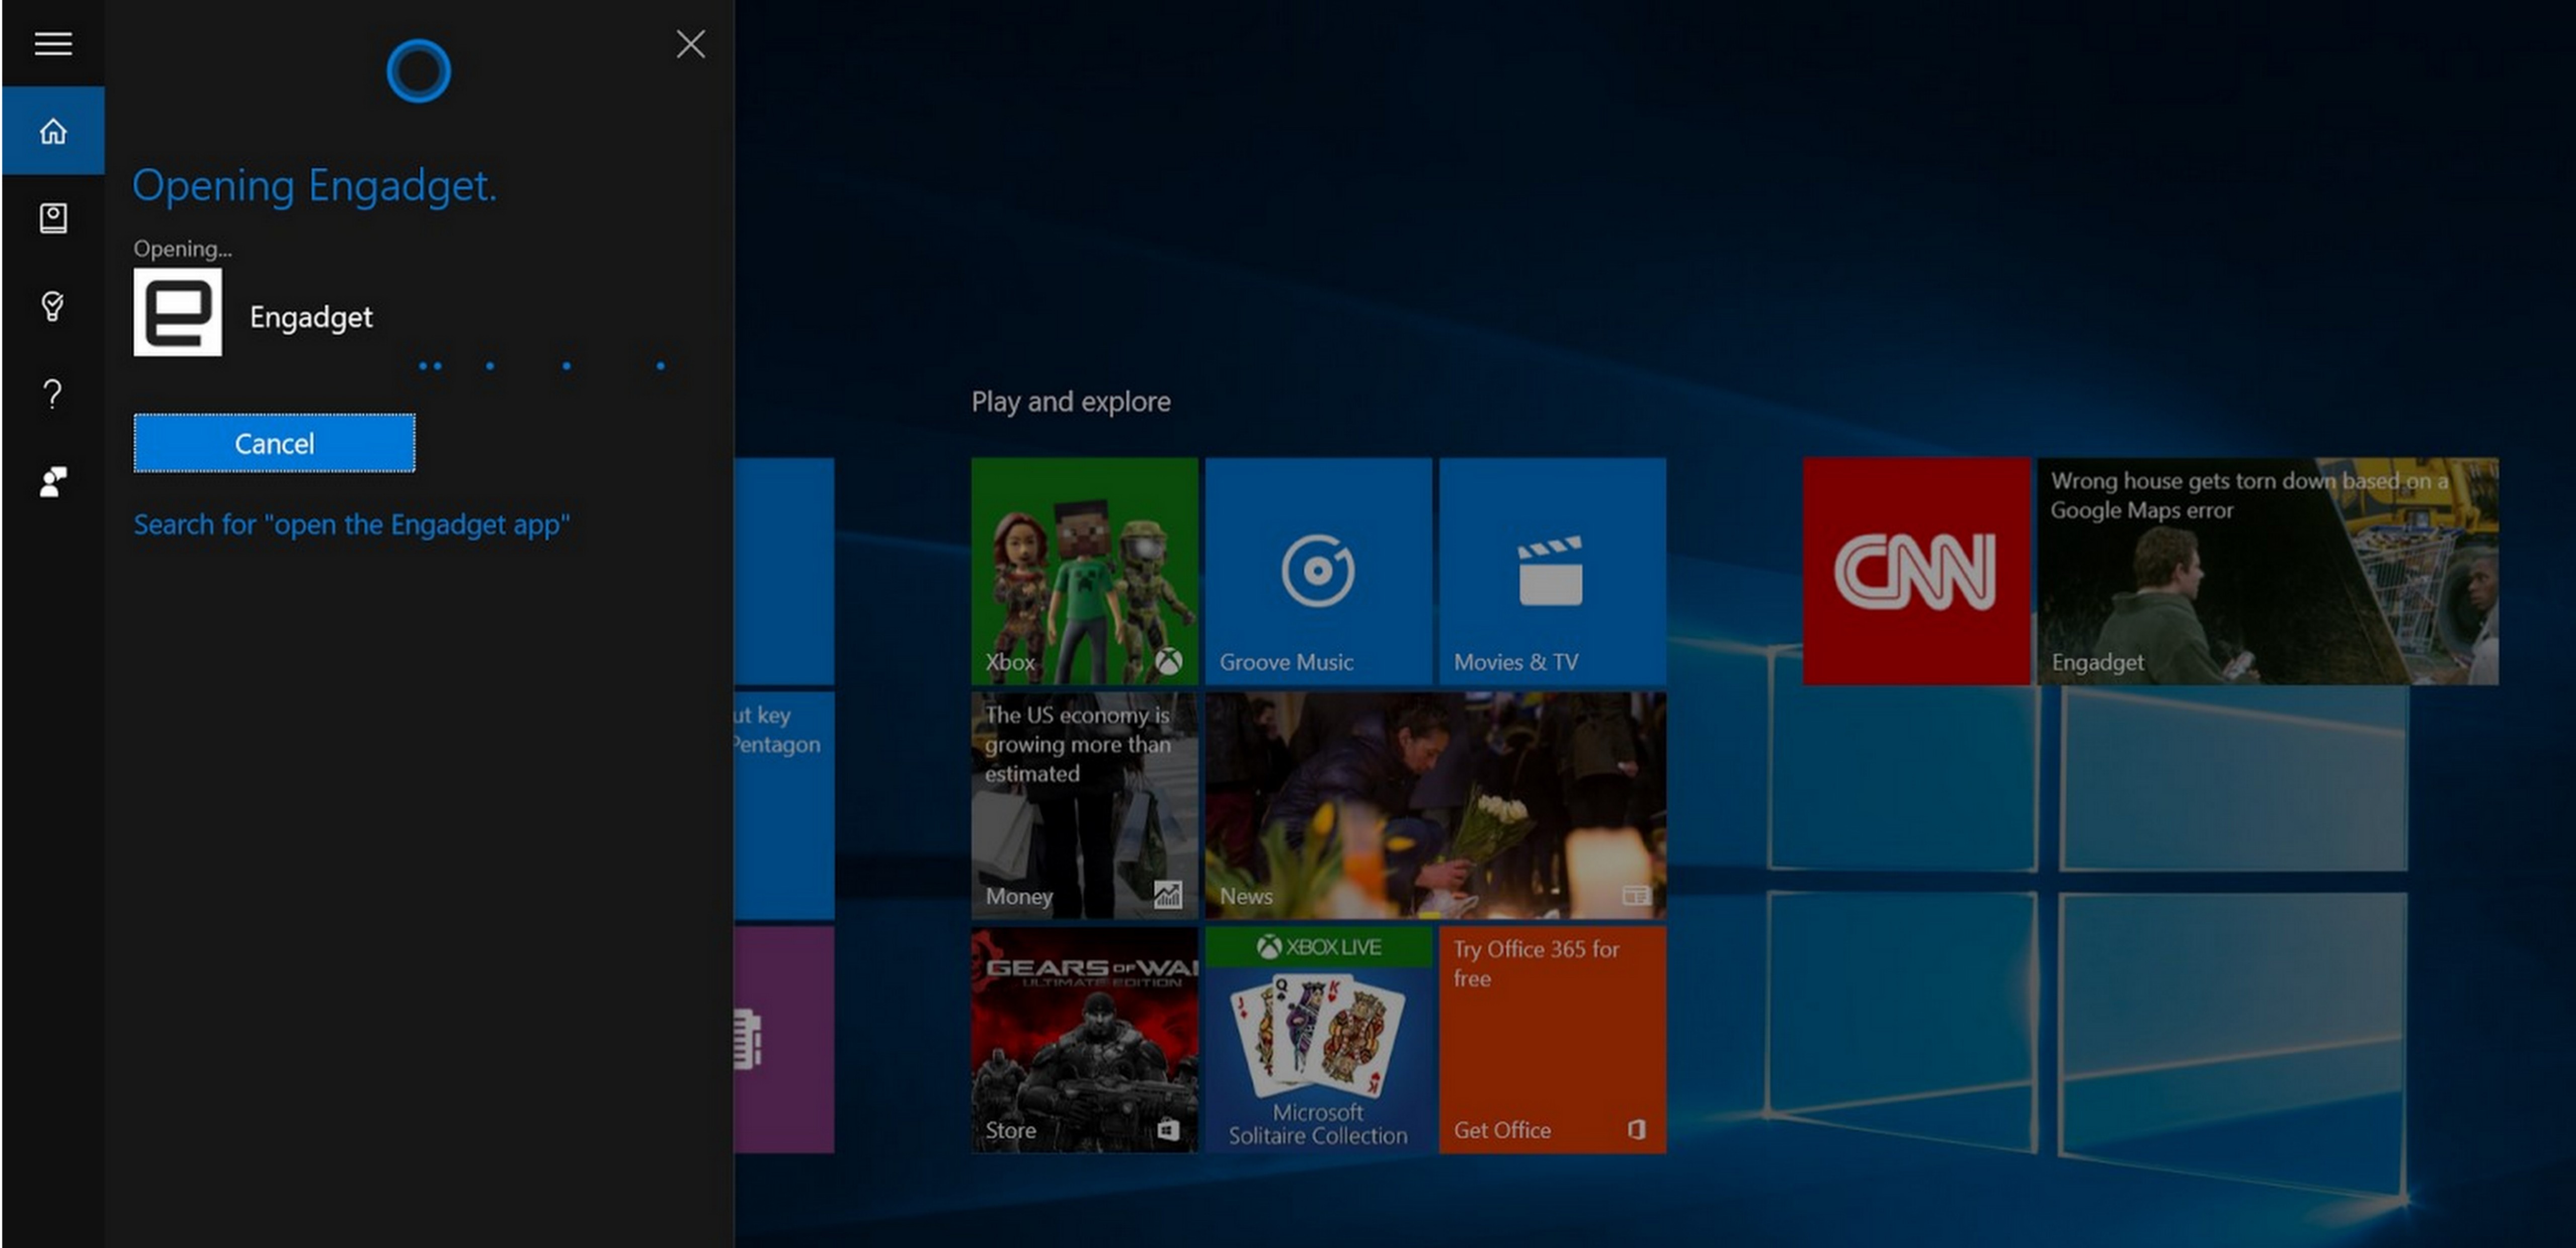 The Engadget app is now available for download on Windows 10